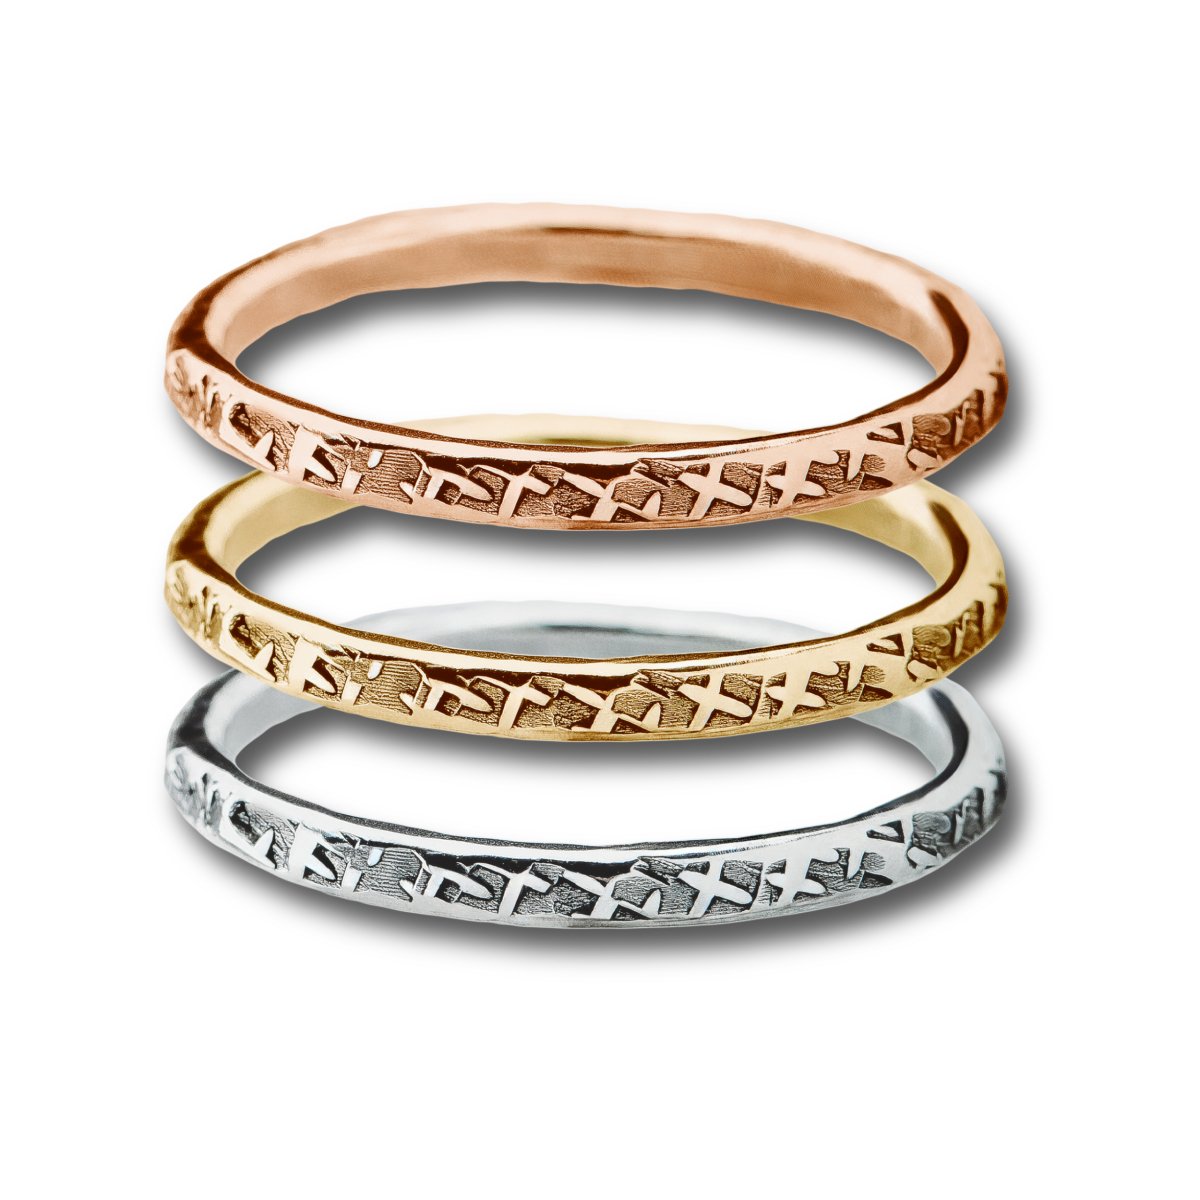 Trio of Raw Silk Stacking Rings